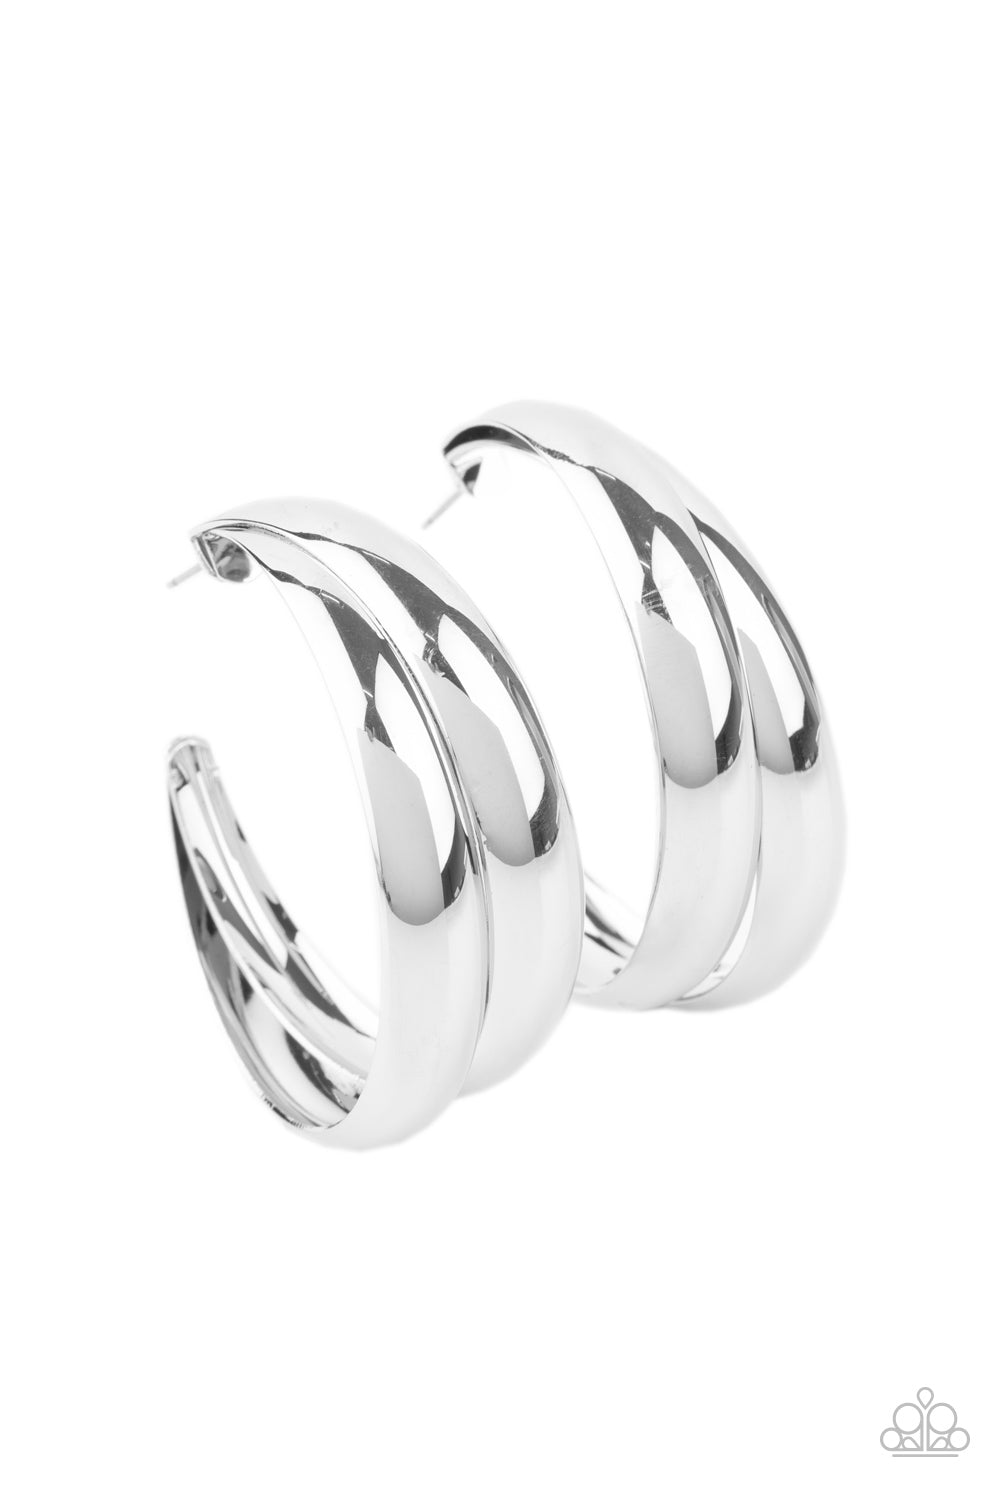 Colossal Curves Silver Earring